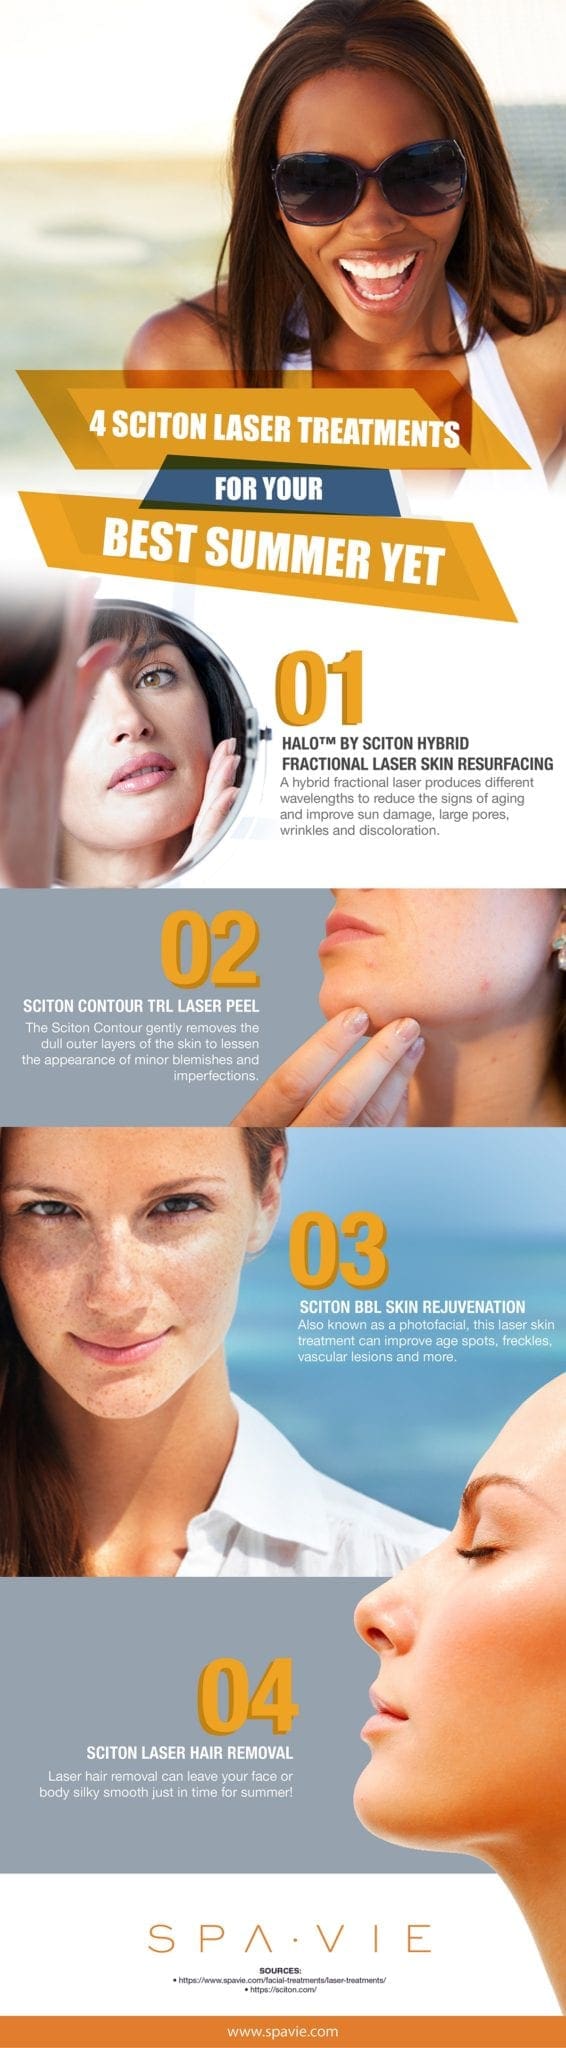 4 Sciton Laser Treatments for Your Best Summer Yet [Infographic]